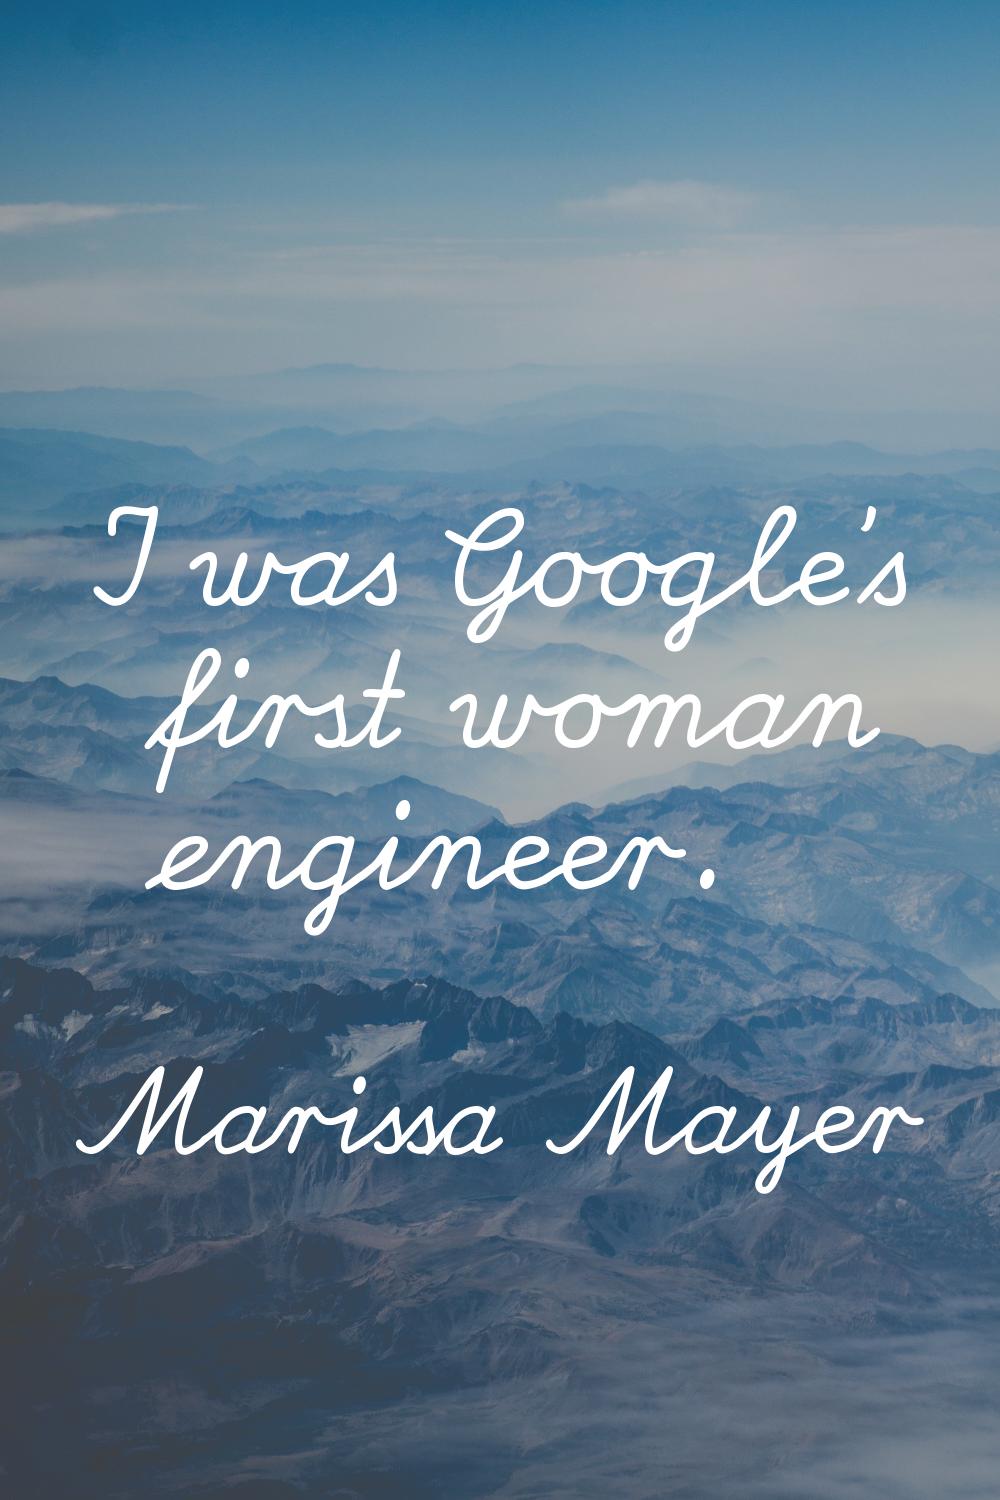 I was Google's first woman engineer.